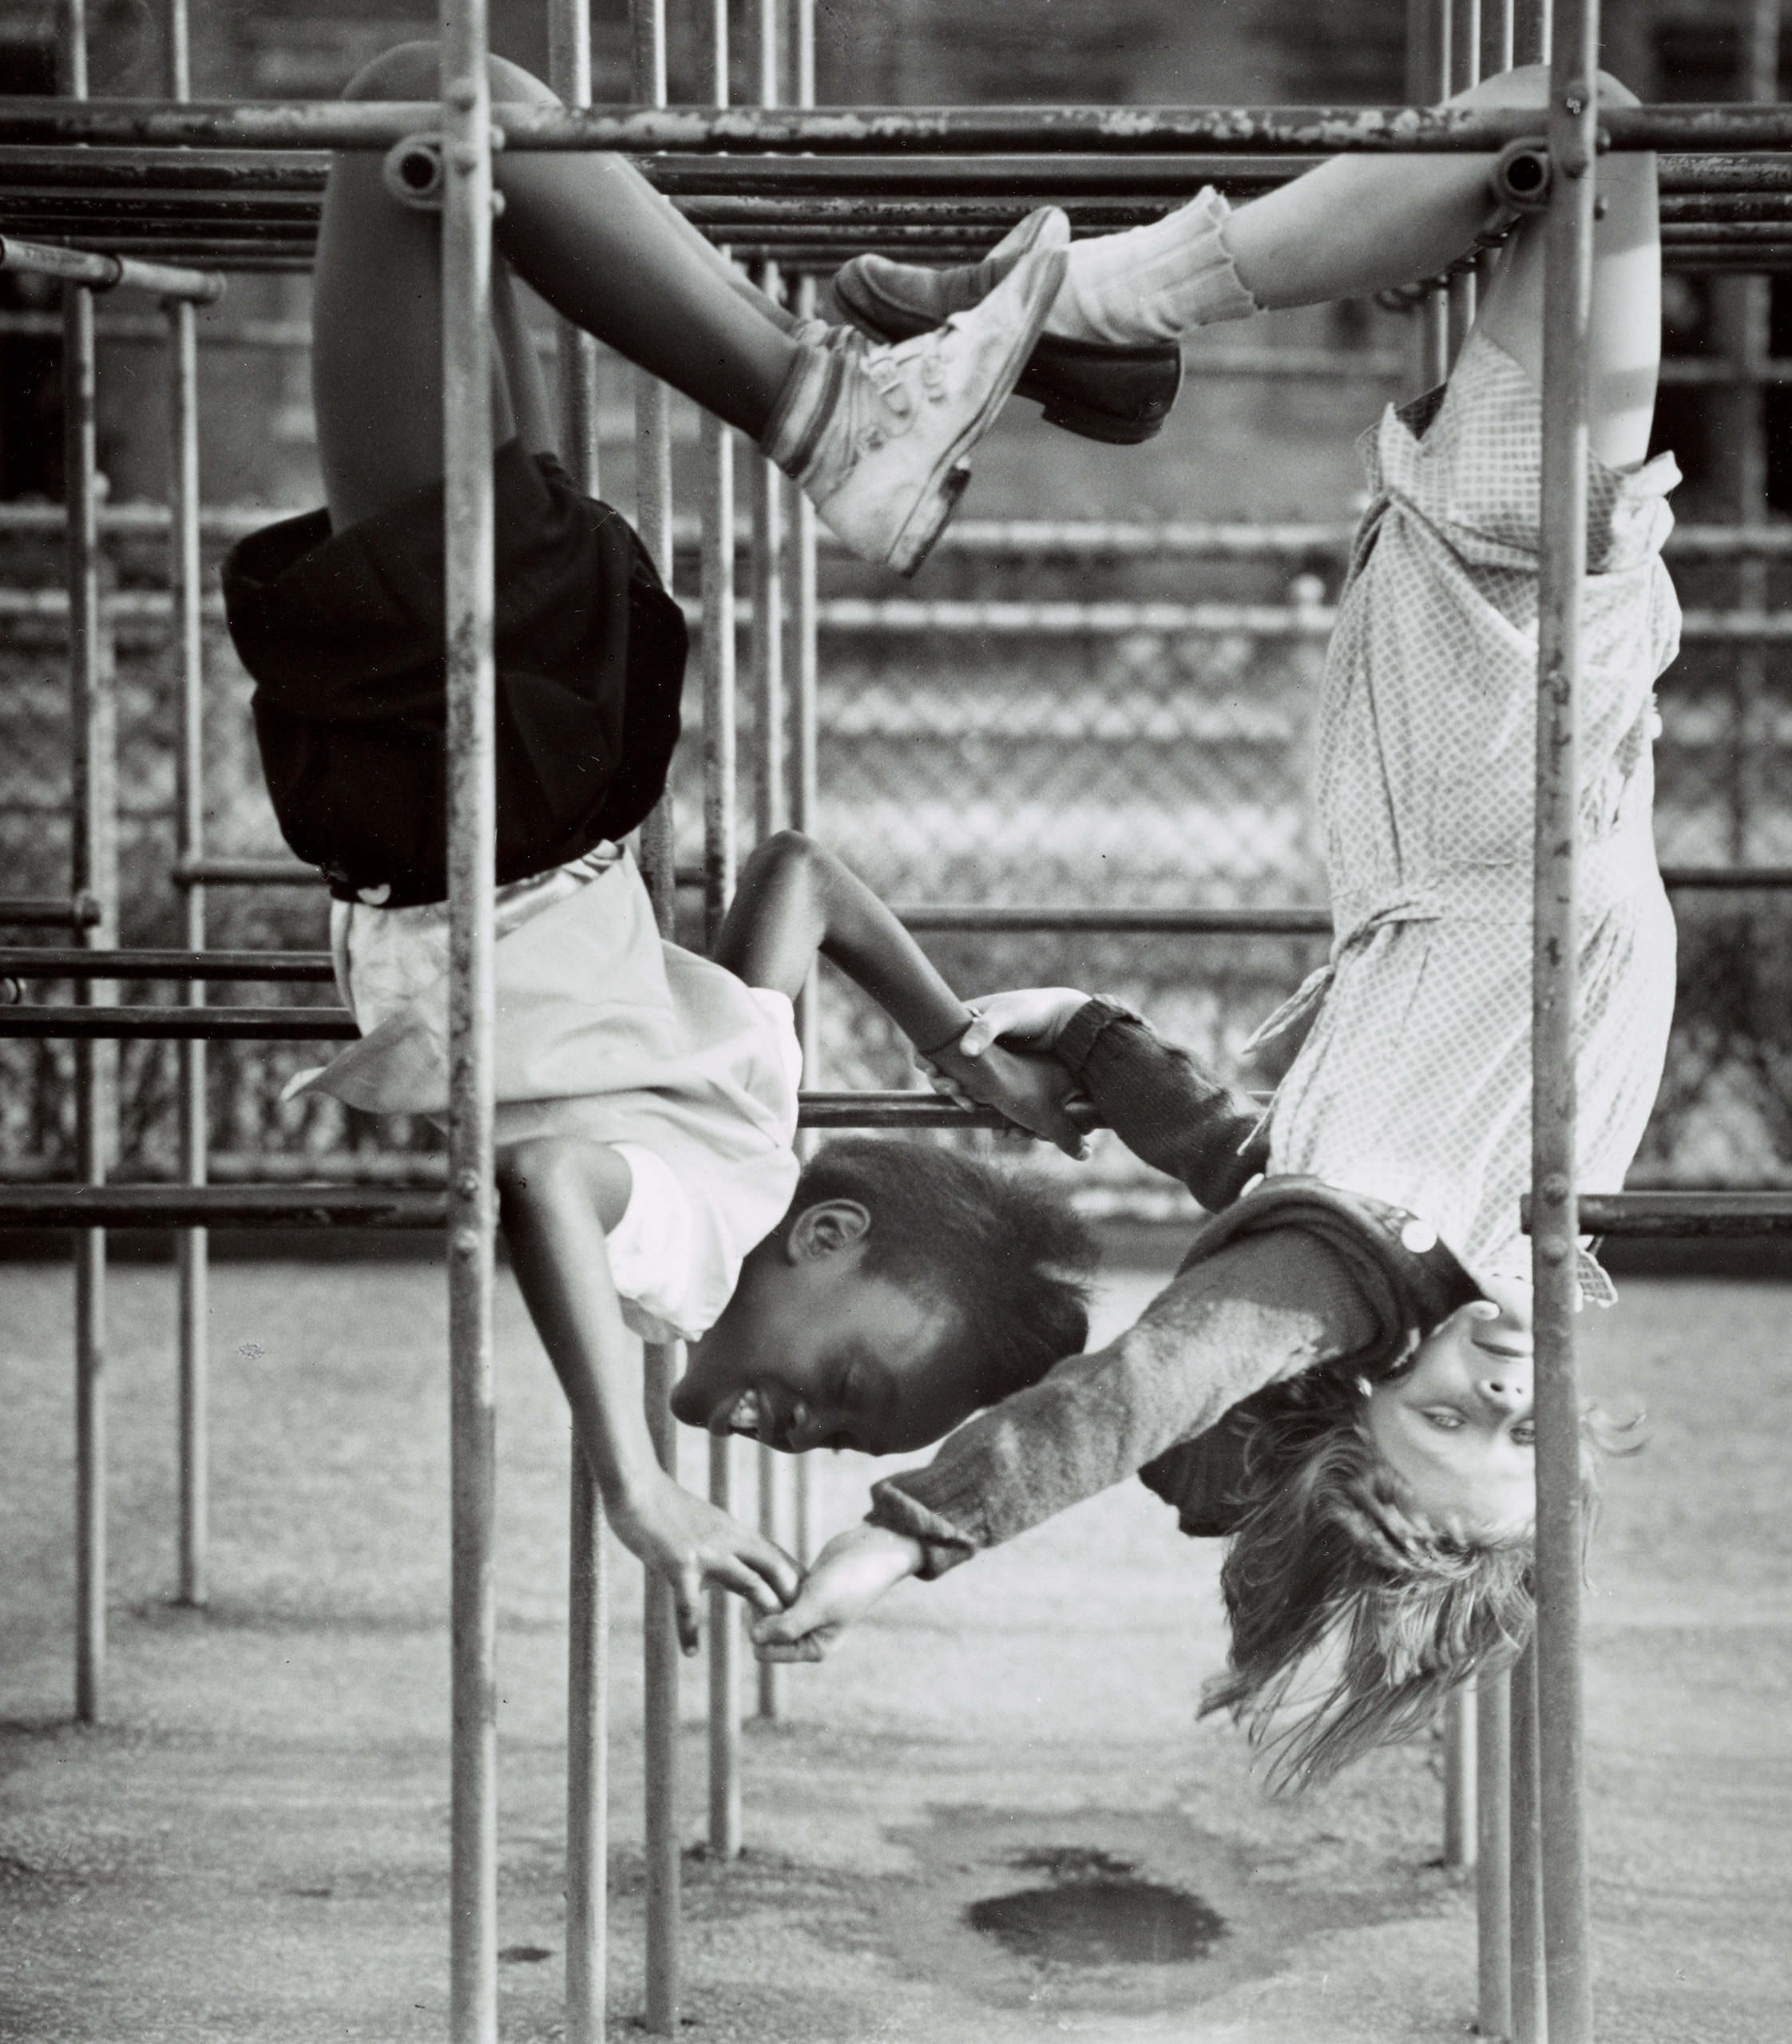 Two schoolgirls holding hands as they hang upside down from a jungle gym. Circa 1940s.